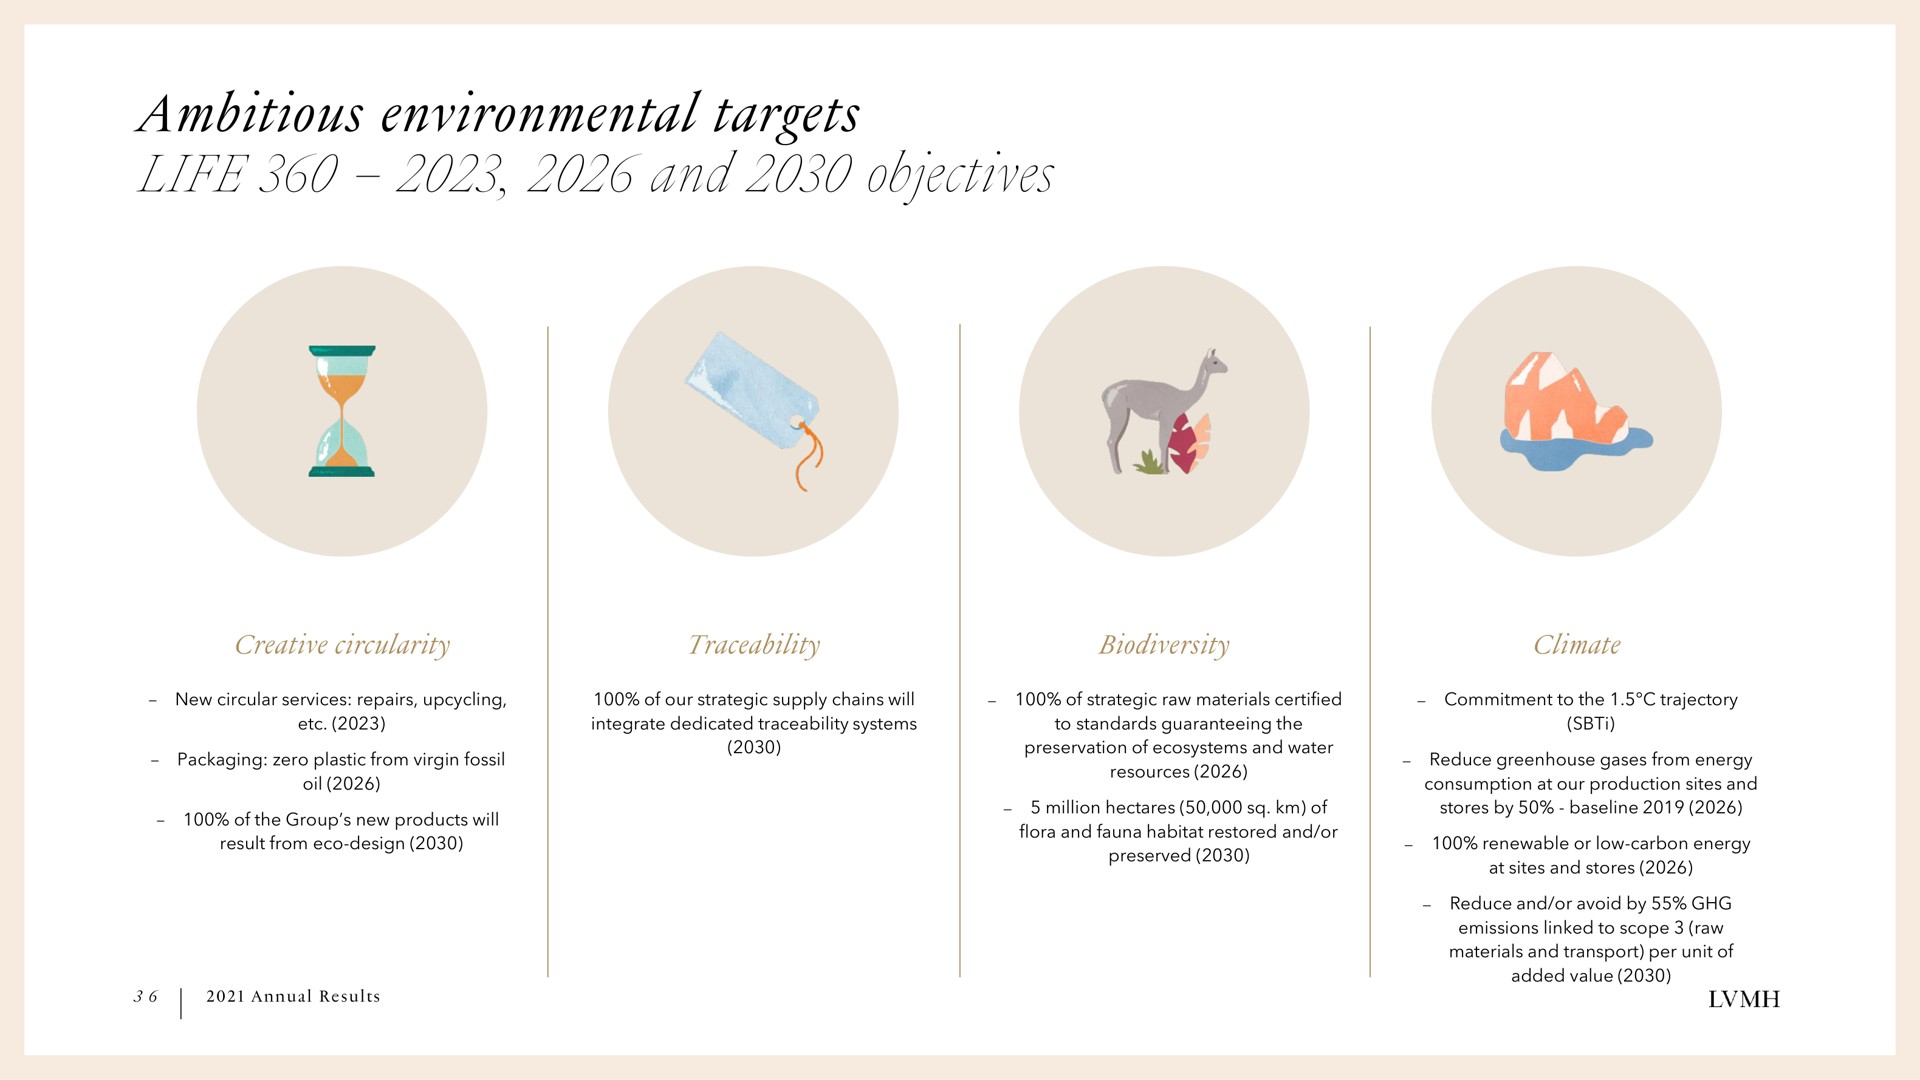 ambitious environmental targets life and objectives | LVMH